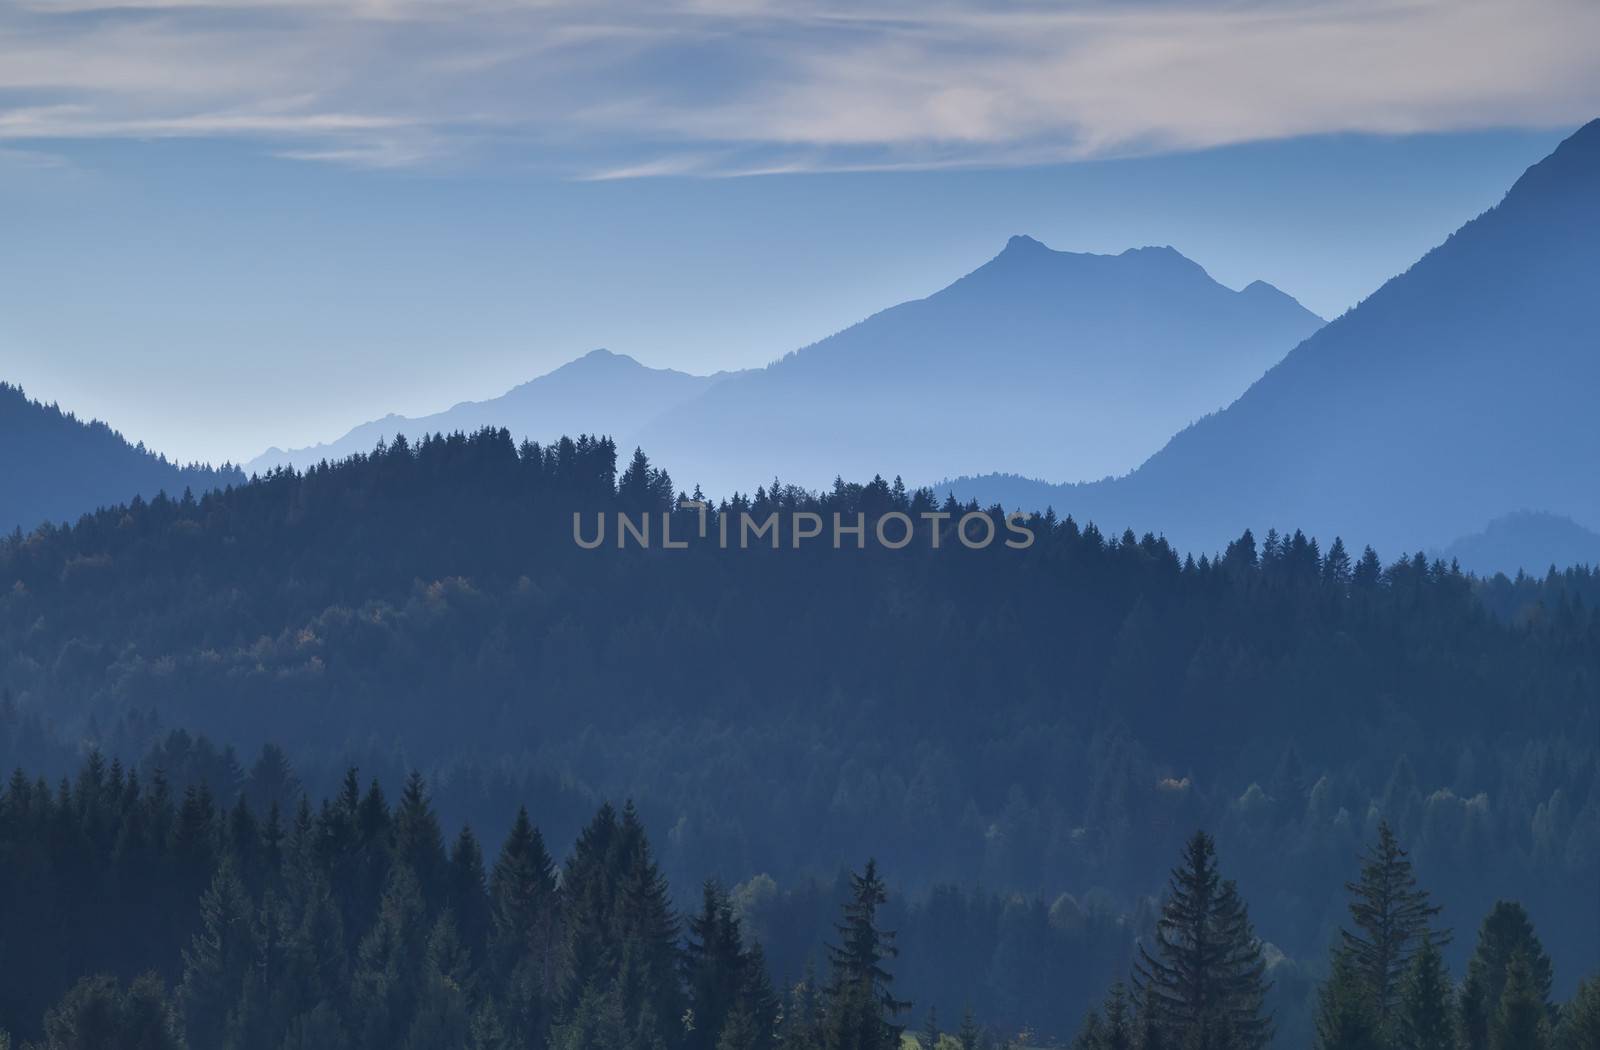 mountain layers in the dusk, Bavarian Alps, Germany